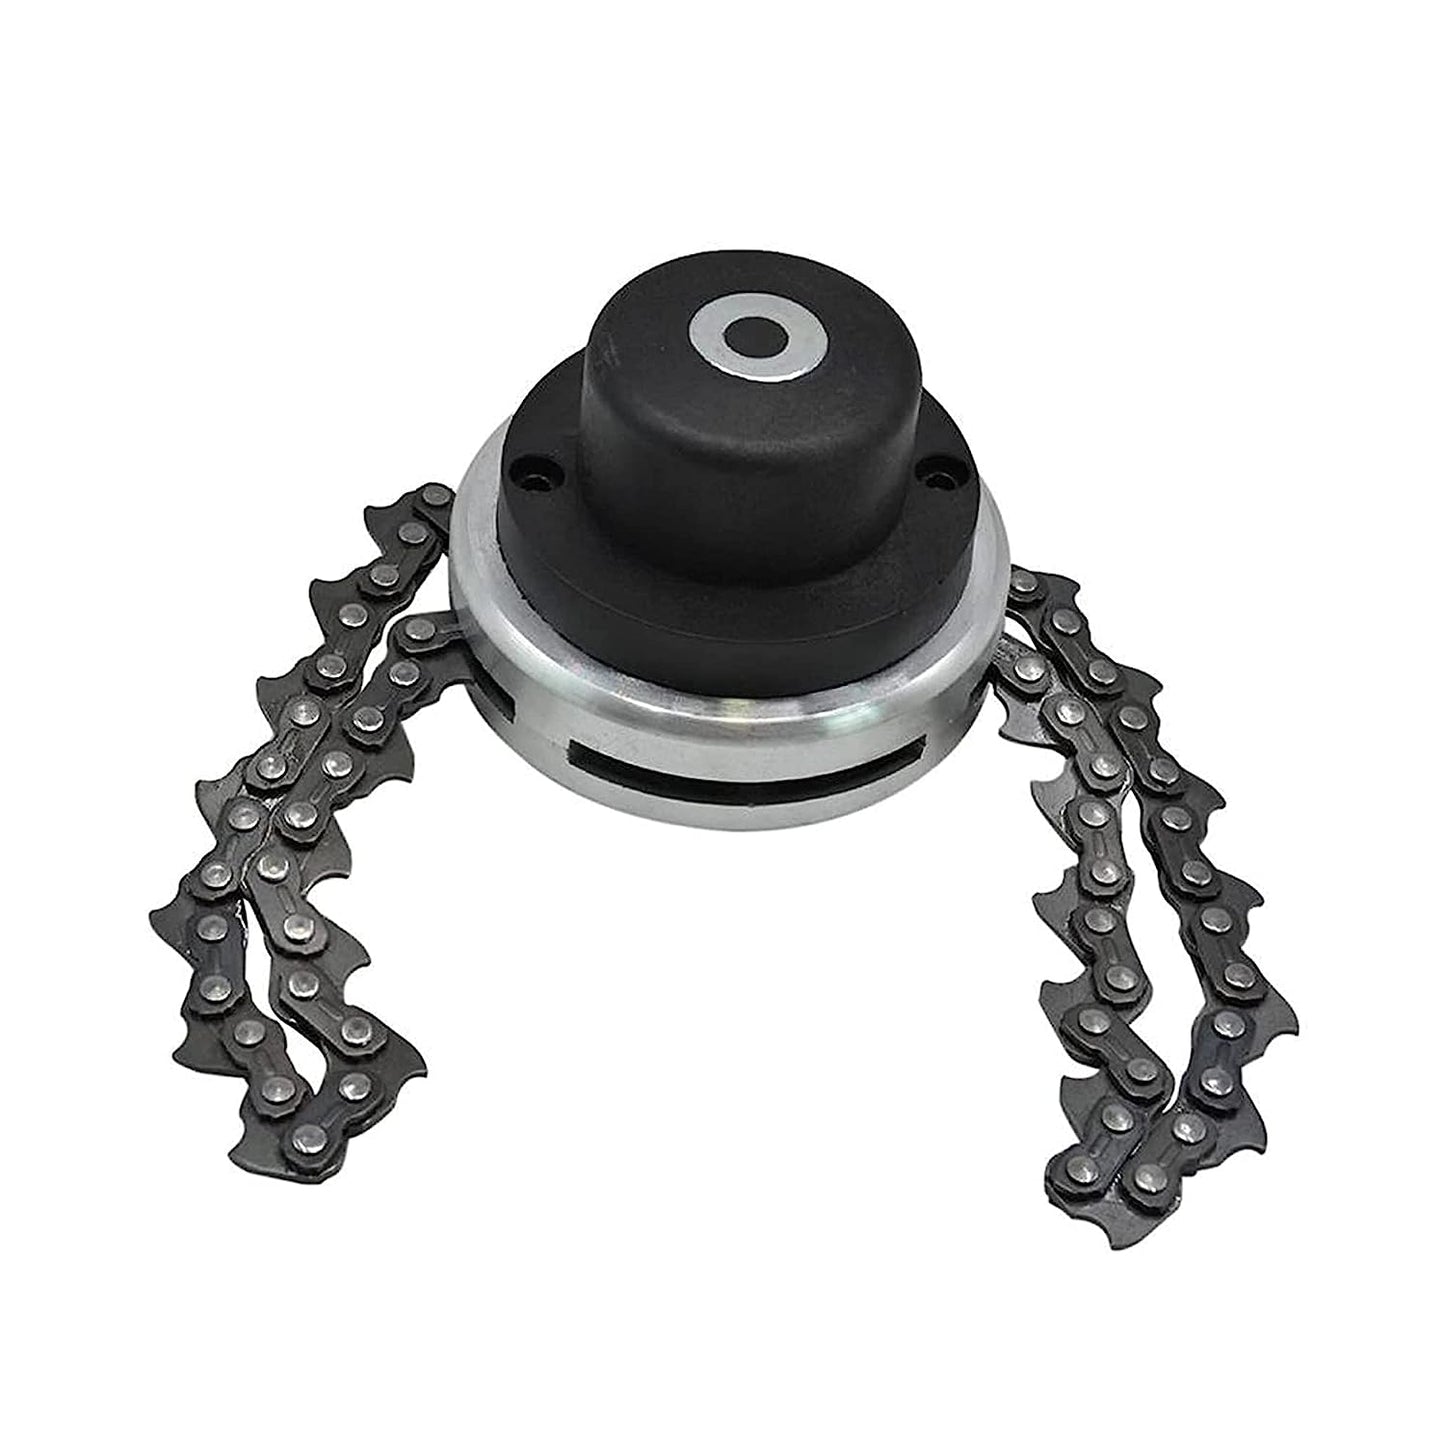 Aegon Heavy-Duty Chain Trimmer Head Ideal for Brush Cutters in Agriculture/Gardening/Farming